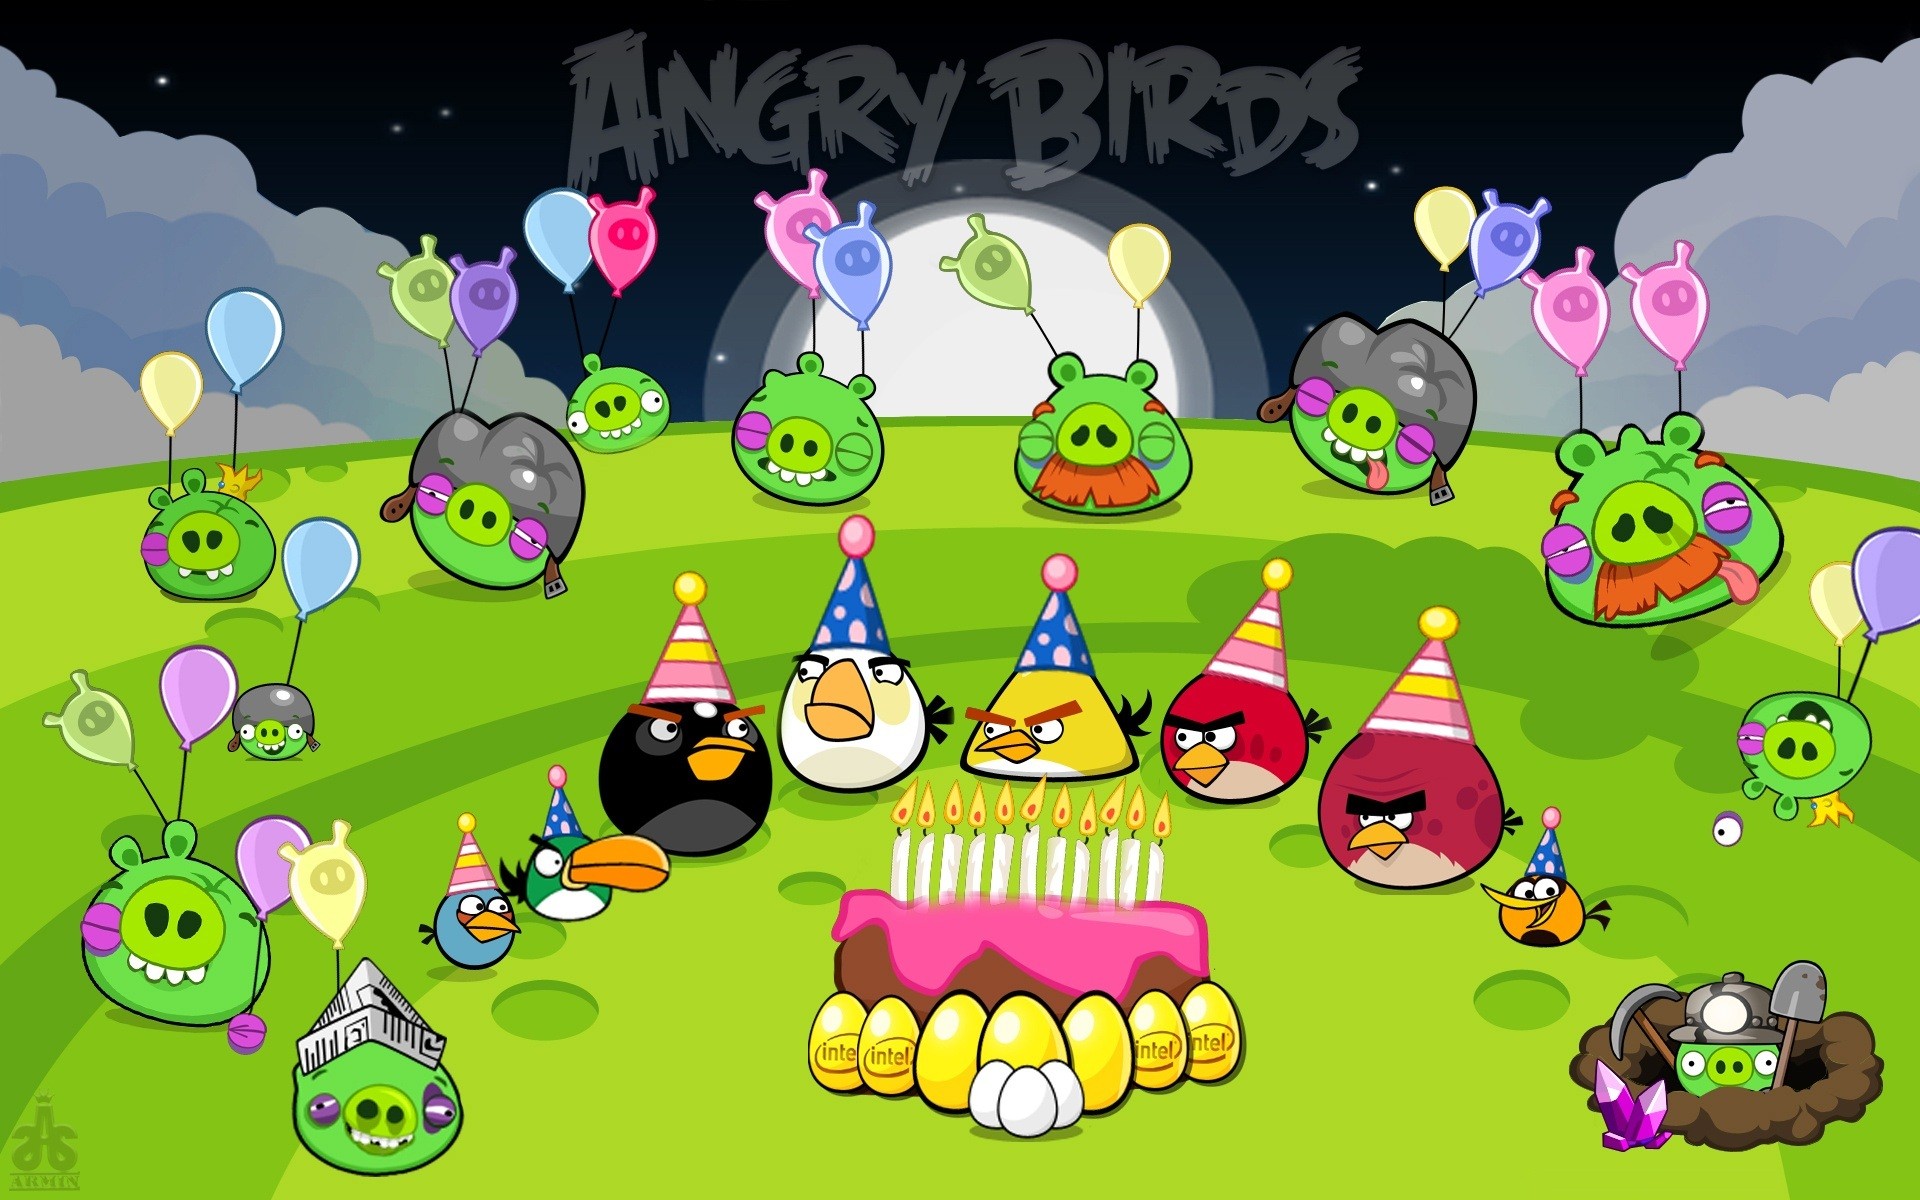 Download the Angry Birds Happy Birthday Wallpaper, Angry Birds